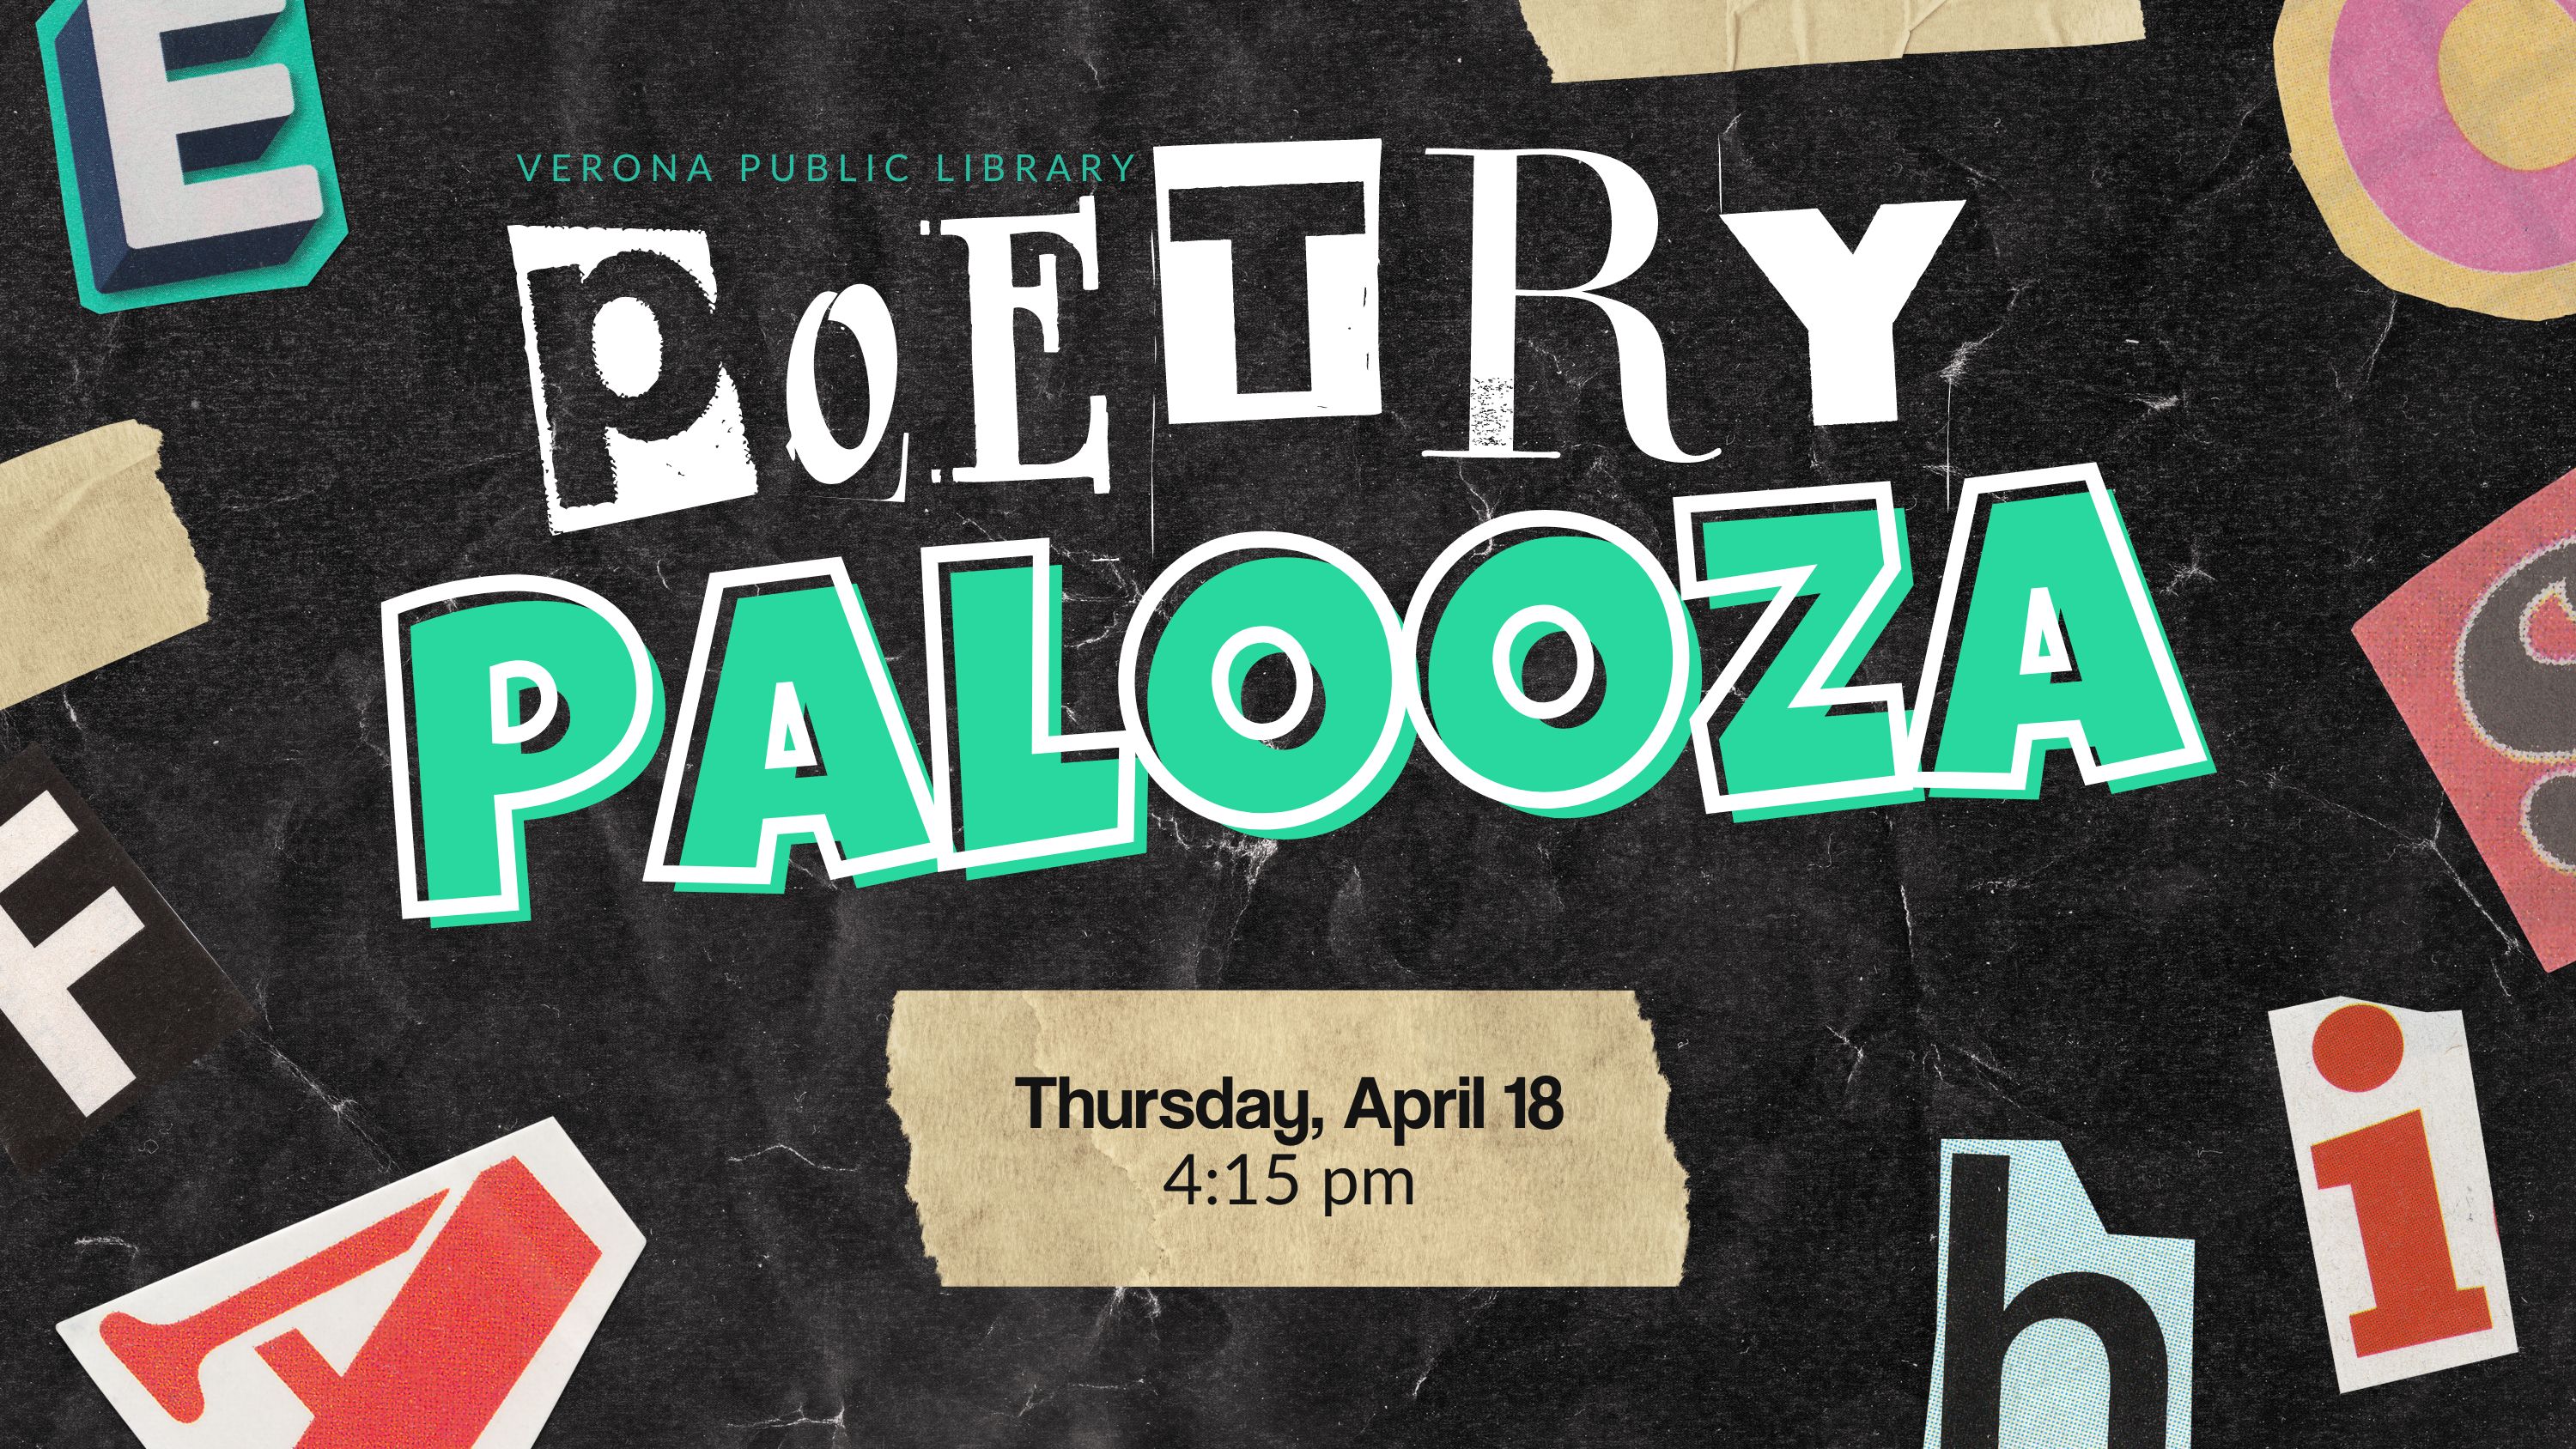 text cut out of magazines, masking tape, and the words "poetry palooza"